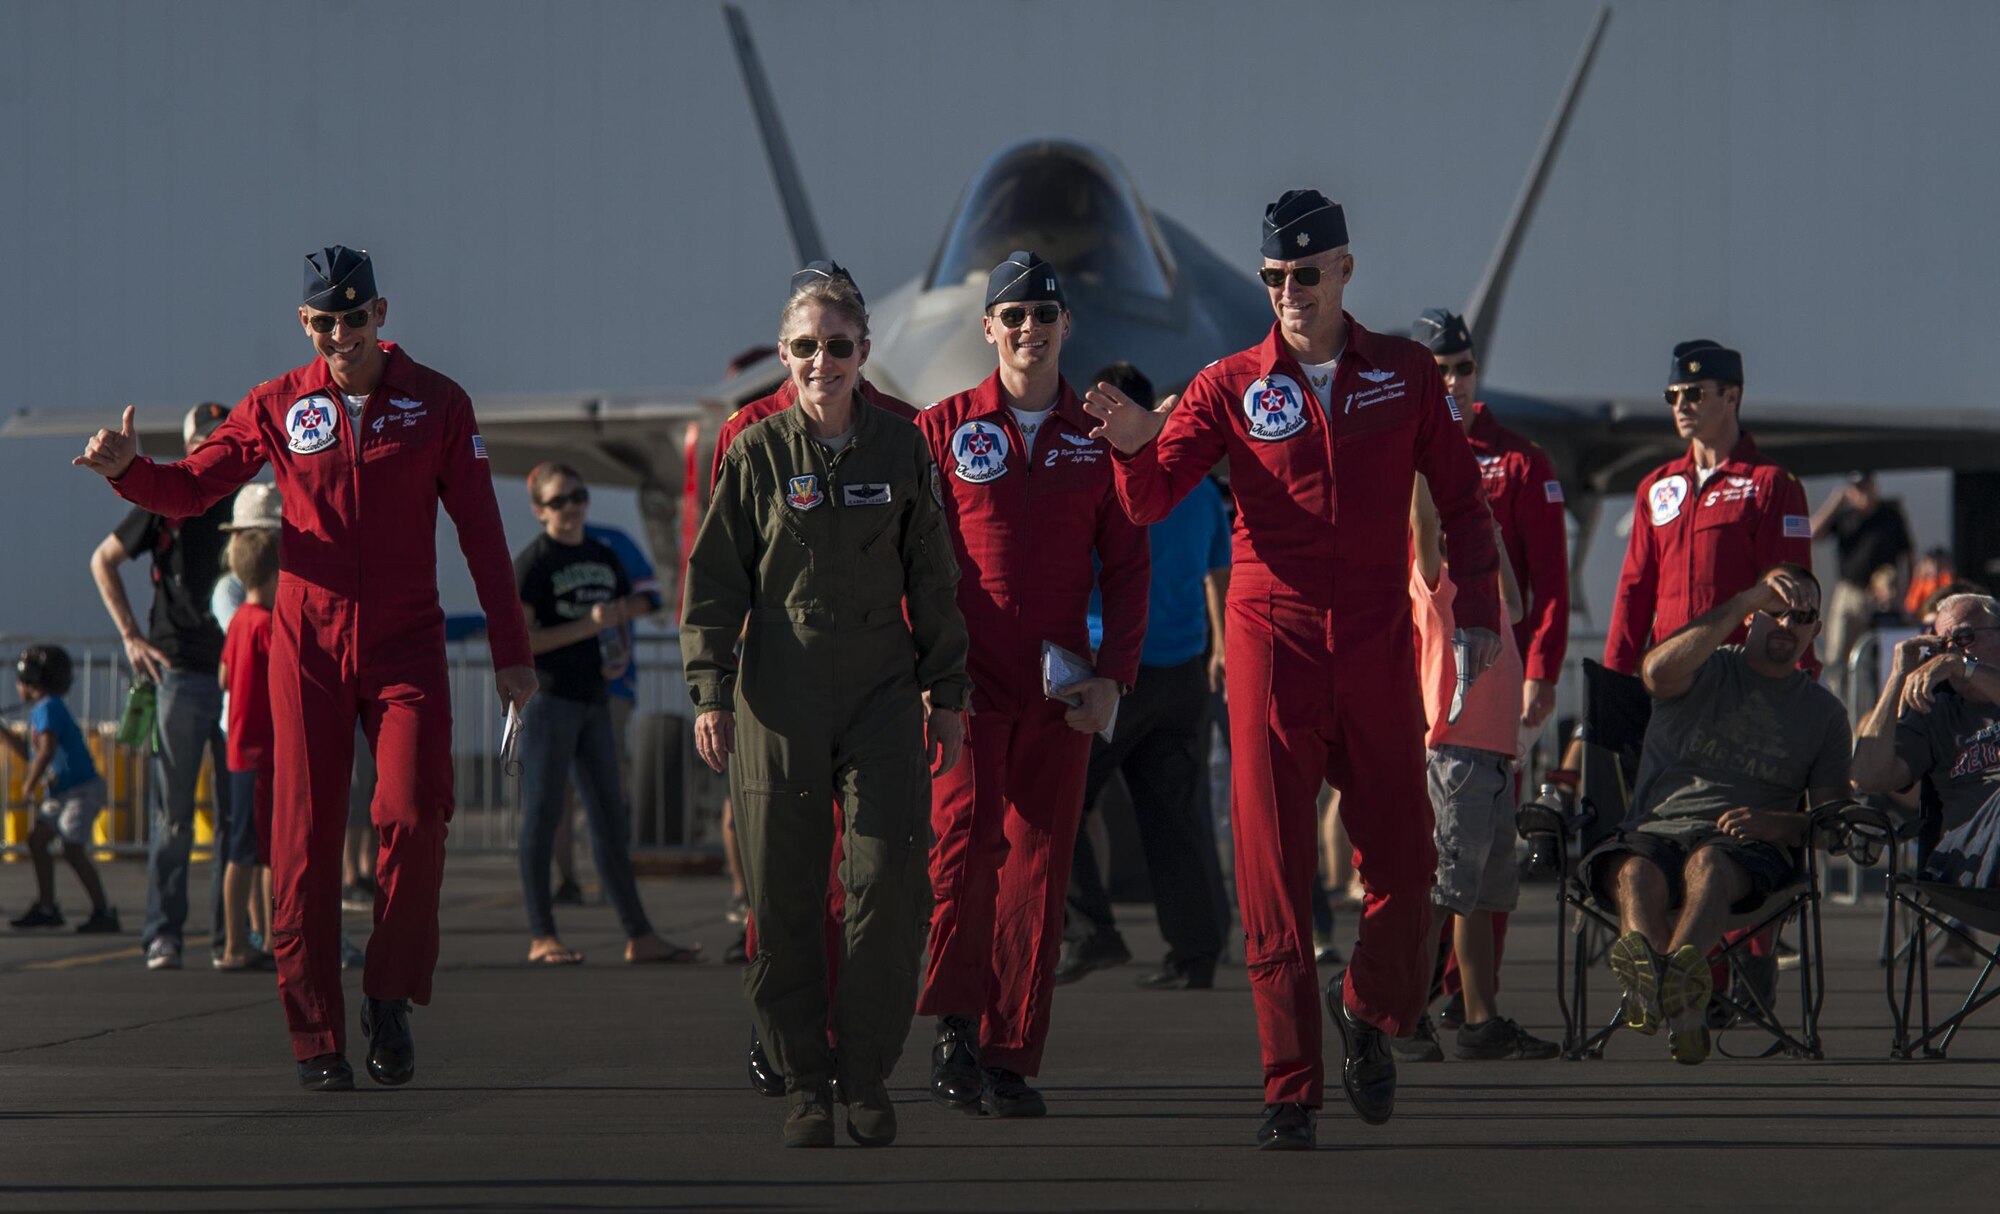 Brig. Gen. Jeannie Levitt, 57th Wing commander, walks with the U.S. Air Force Thunderbirds Air Demonstration Squadron pilots prior to flying with them during the Aviation Nation air show on Nellis Air Force Base, Nev., Nov. 11, 2016. Levitt became the first female USAF fighter pilot in 1993 and was the first woman to command a USAF combat fighter wing. (U.S. Air Force photo by Airman 1st Class Kevin Tanenbaum/Released)